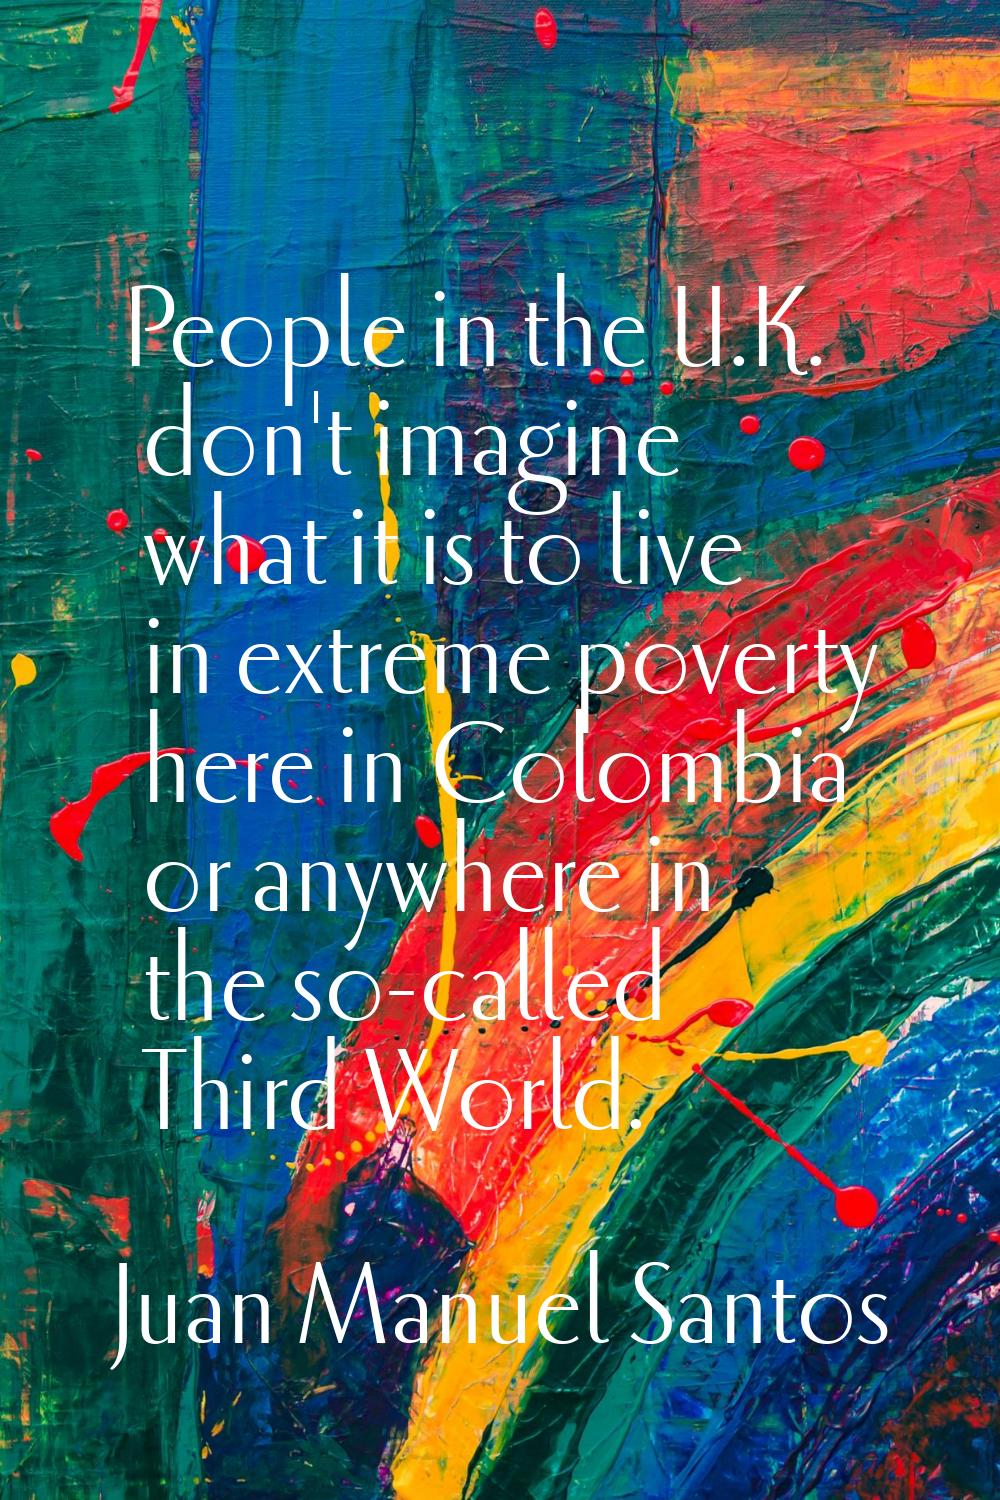 People in the U.K. don't imagine what it is to live in extreme poverty here in Colombia or anywhere